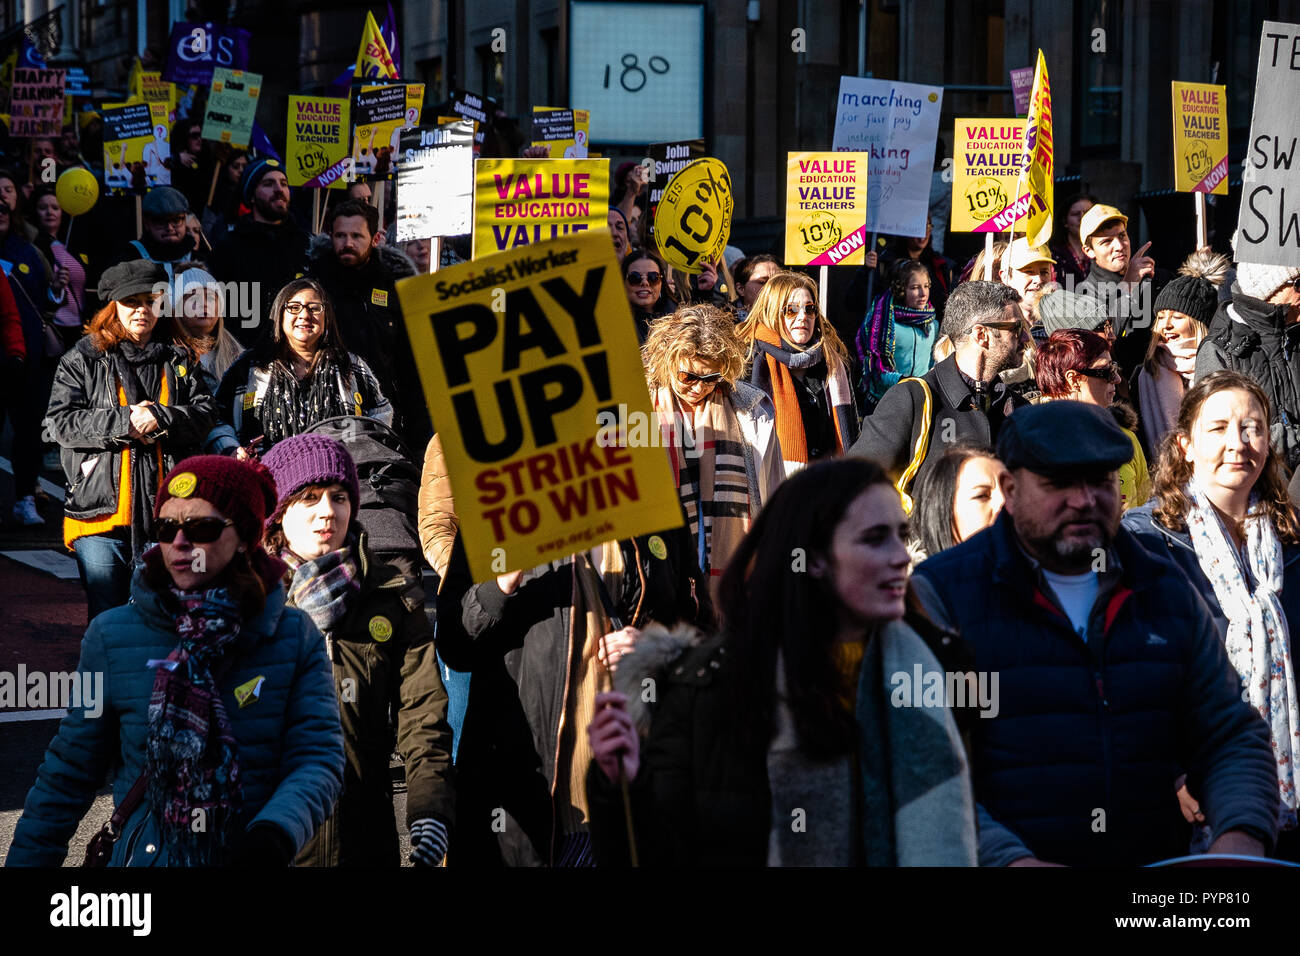 Protesters seen marching with placards. Thousands of education staff went on strike to demand a 10% increase in their wage. The march was organised by Educational Institute of Scotland or EIS, the oldest teaching trade union in the world. Stock Photo